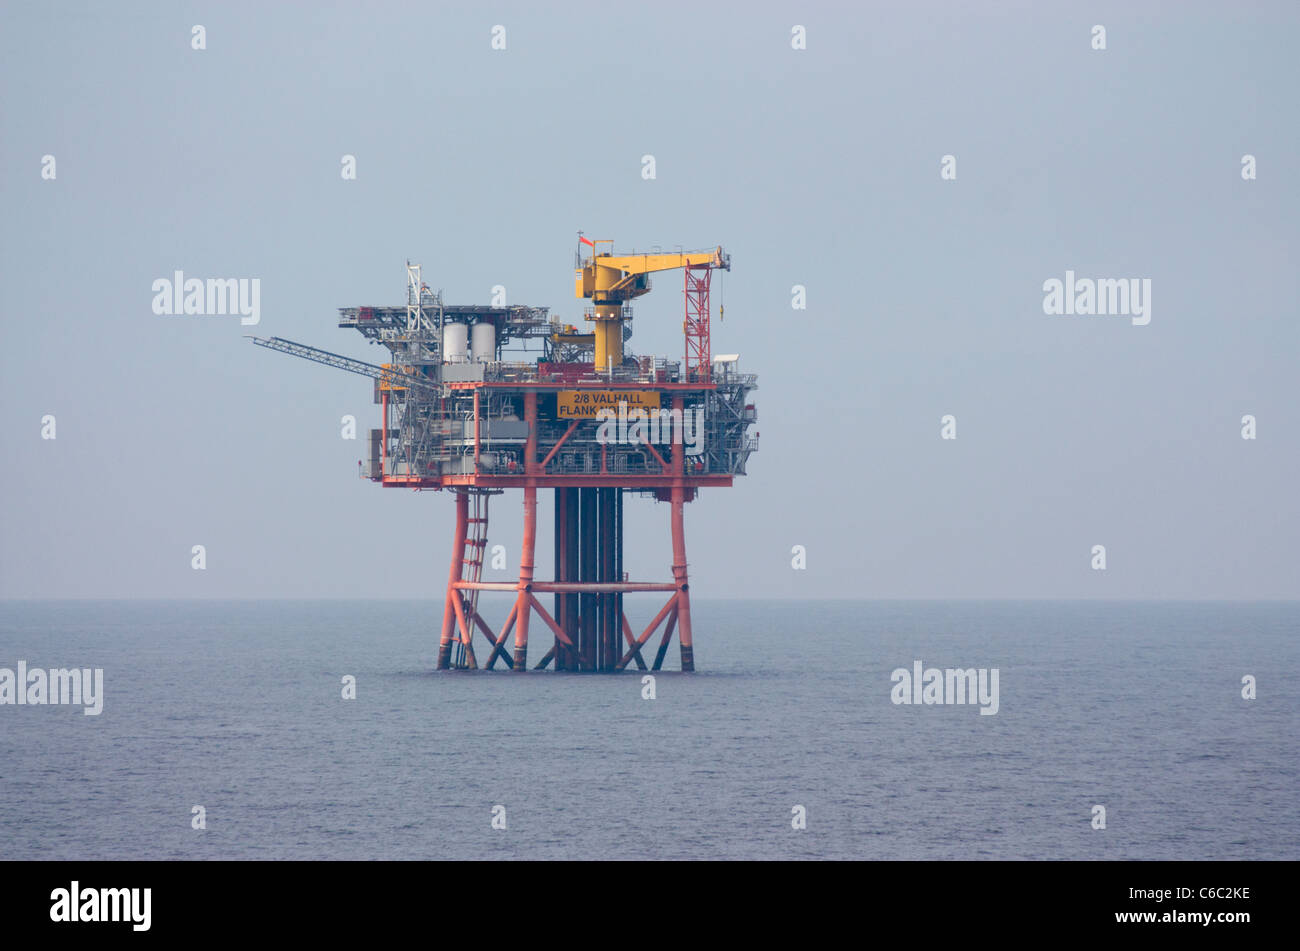 Oil driling rig Valhall Oil field Norwegian part of the North Seal North Sea Stock Photo